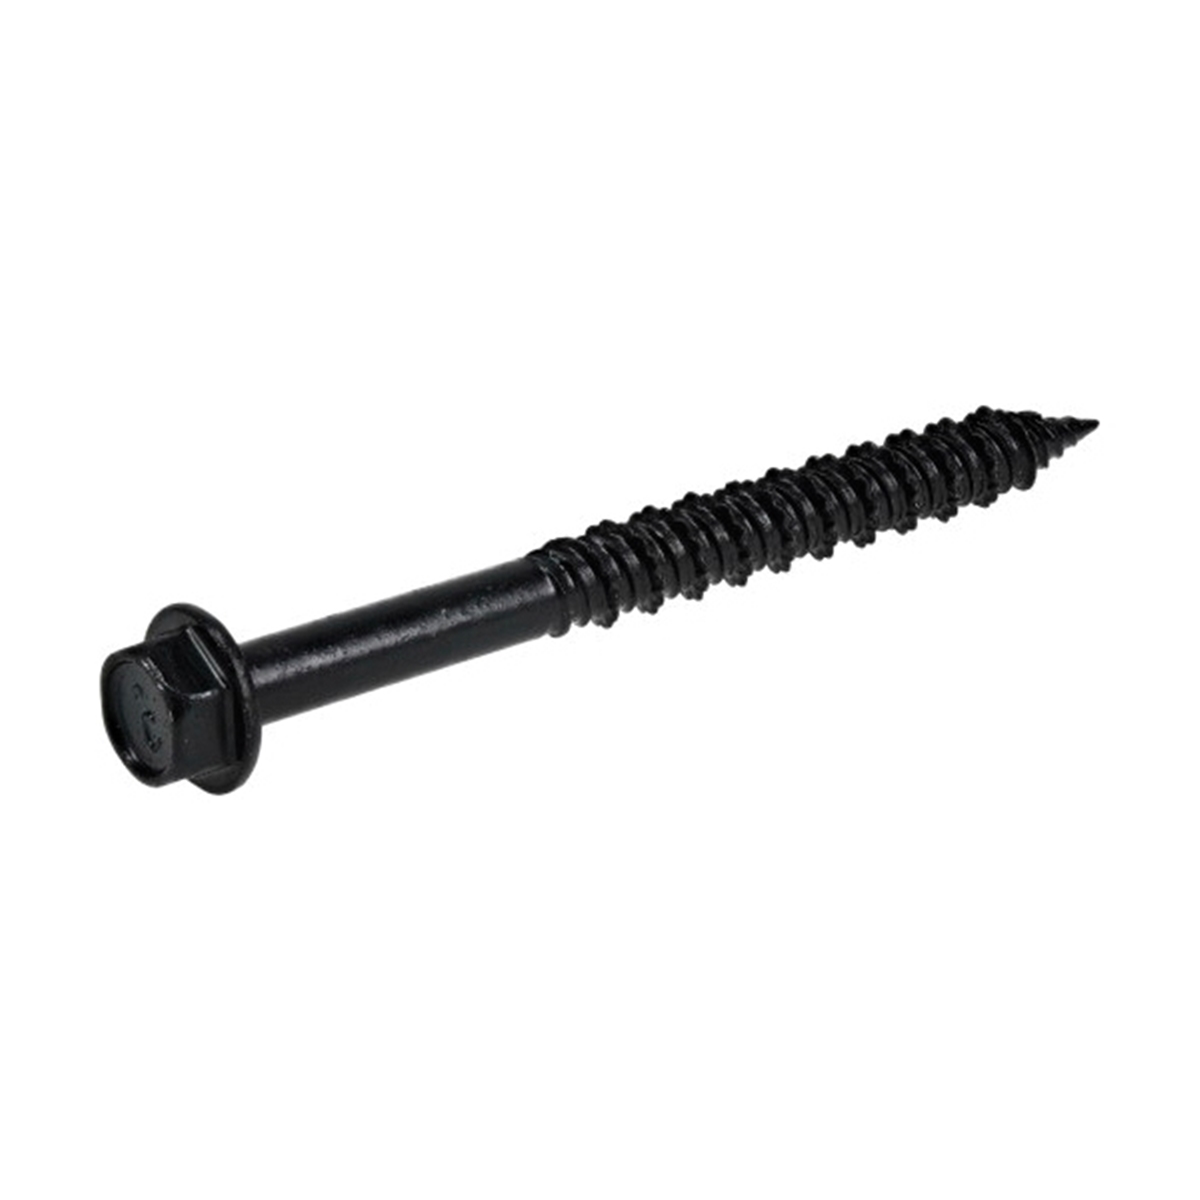 376586 Concrete Screw Anchor, 1/4 in Dia, 2-3/4 in L, Carbon Steel, Epoxy-Coated, 100/PK